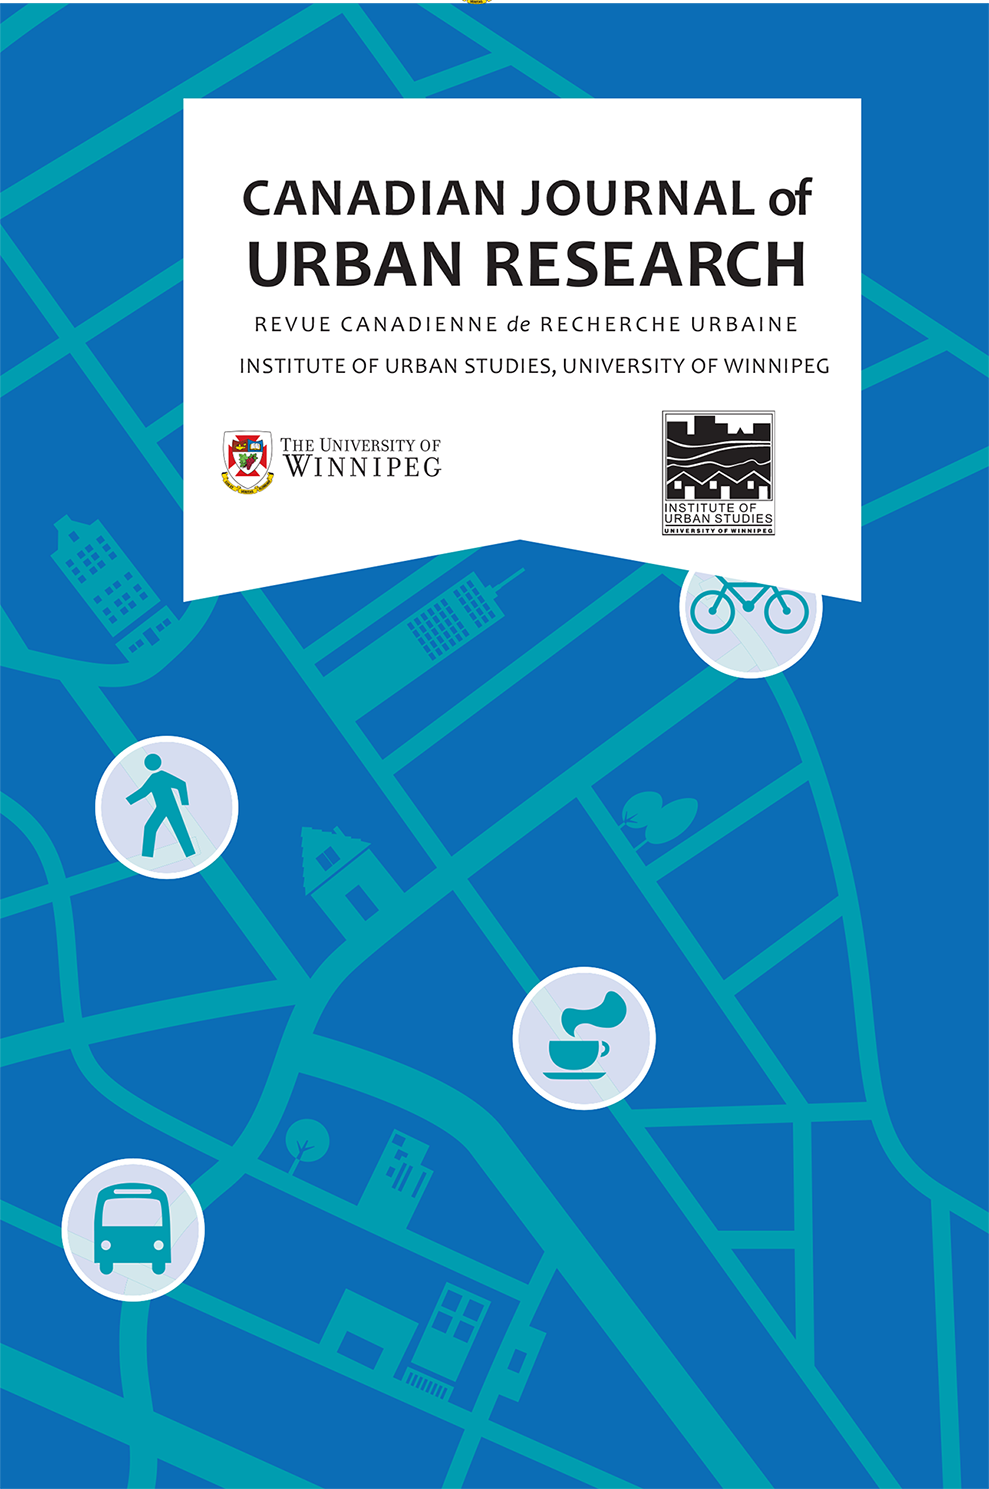 					View Vol. 27 No. 2 (2018): Canadian Journal of Urban Research - Winter 2018 Issue
				